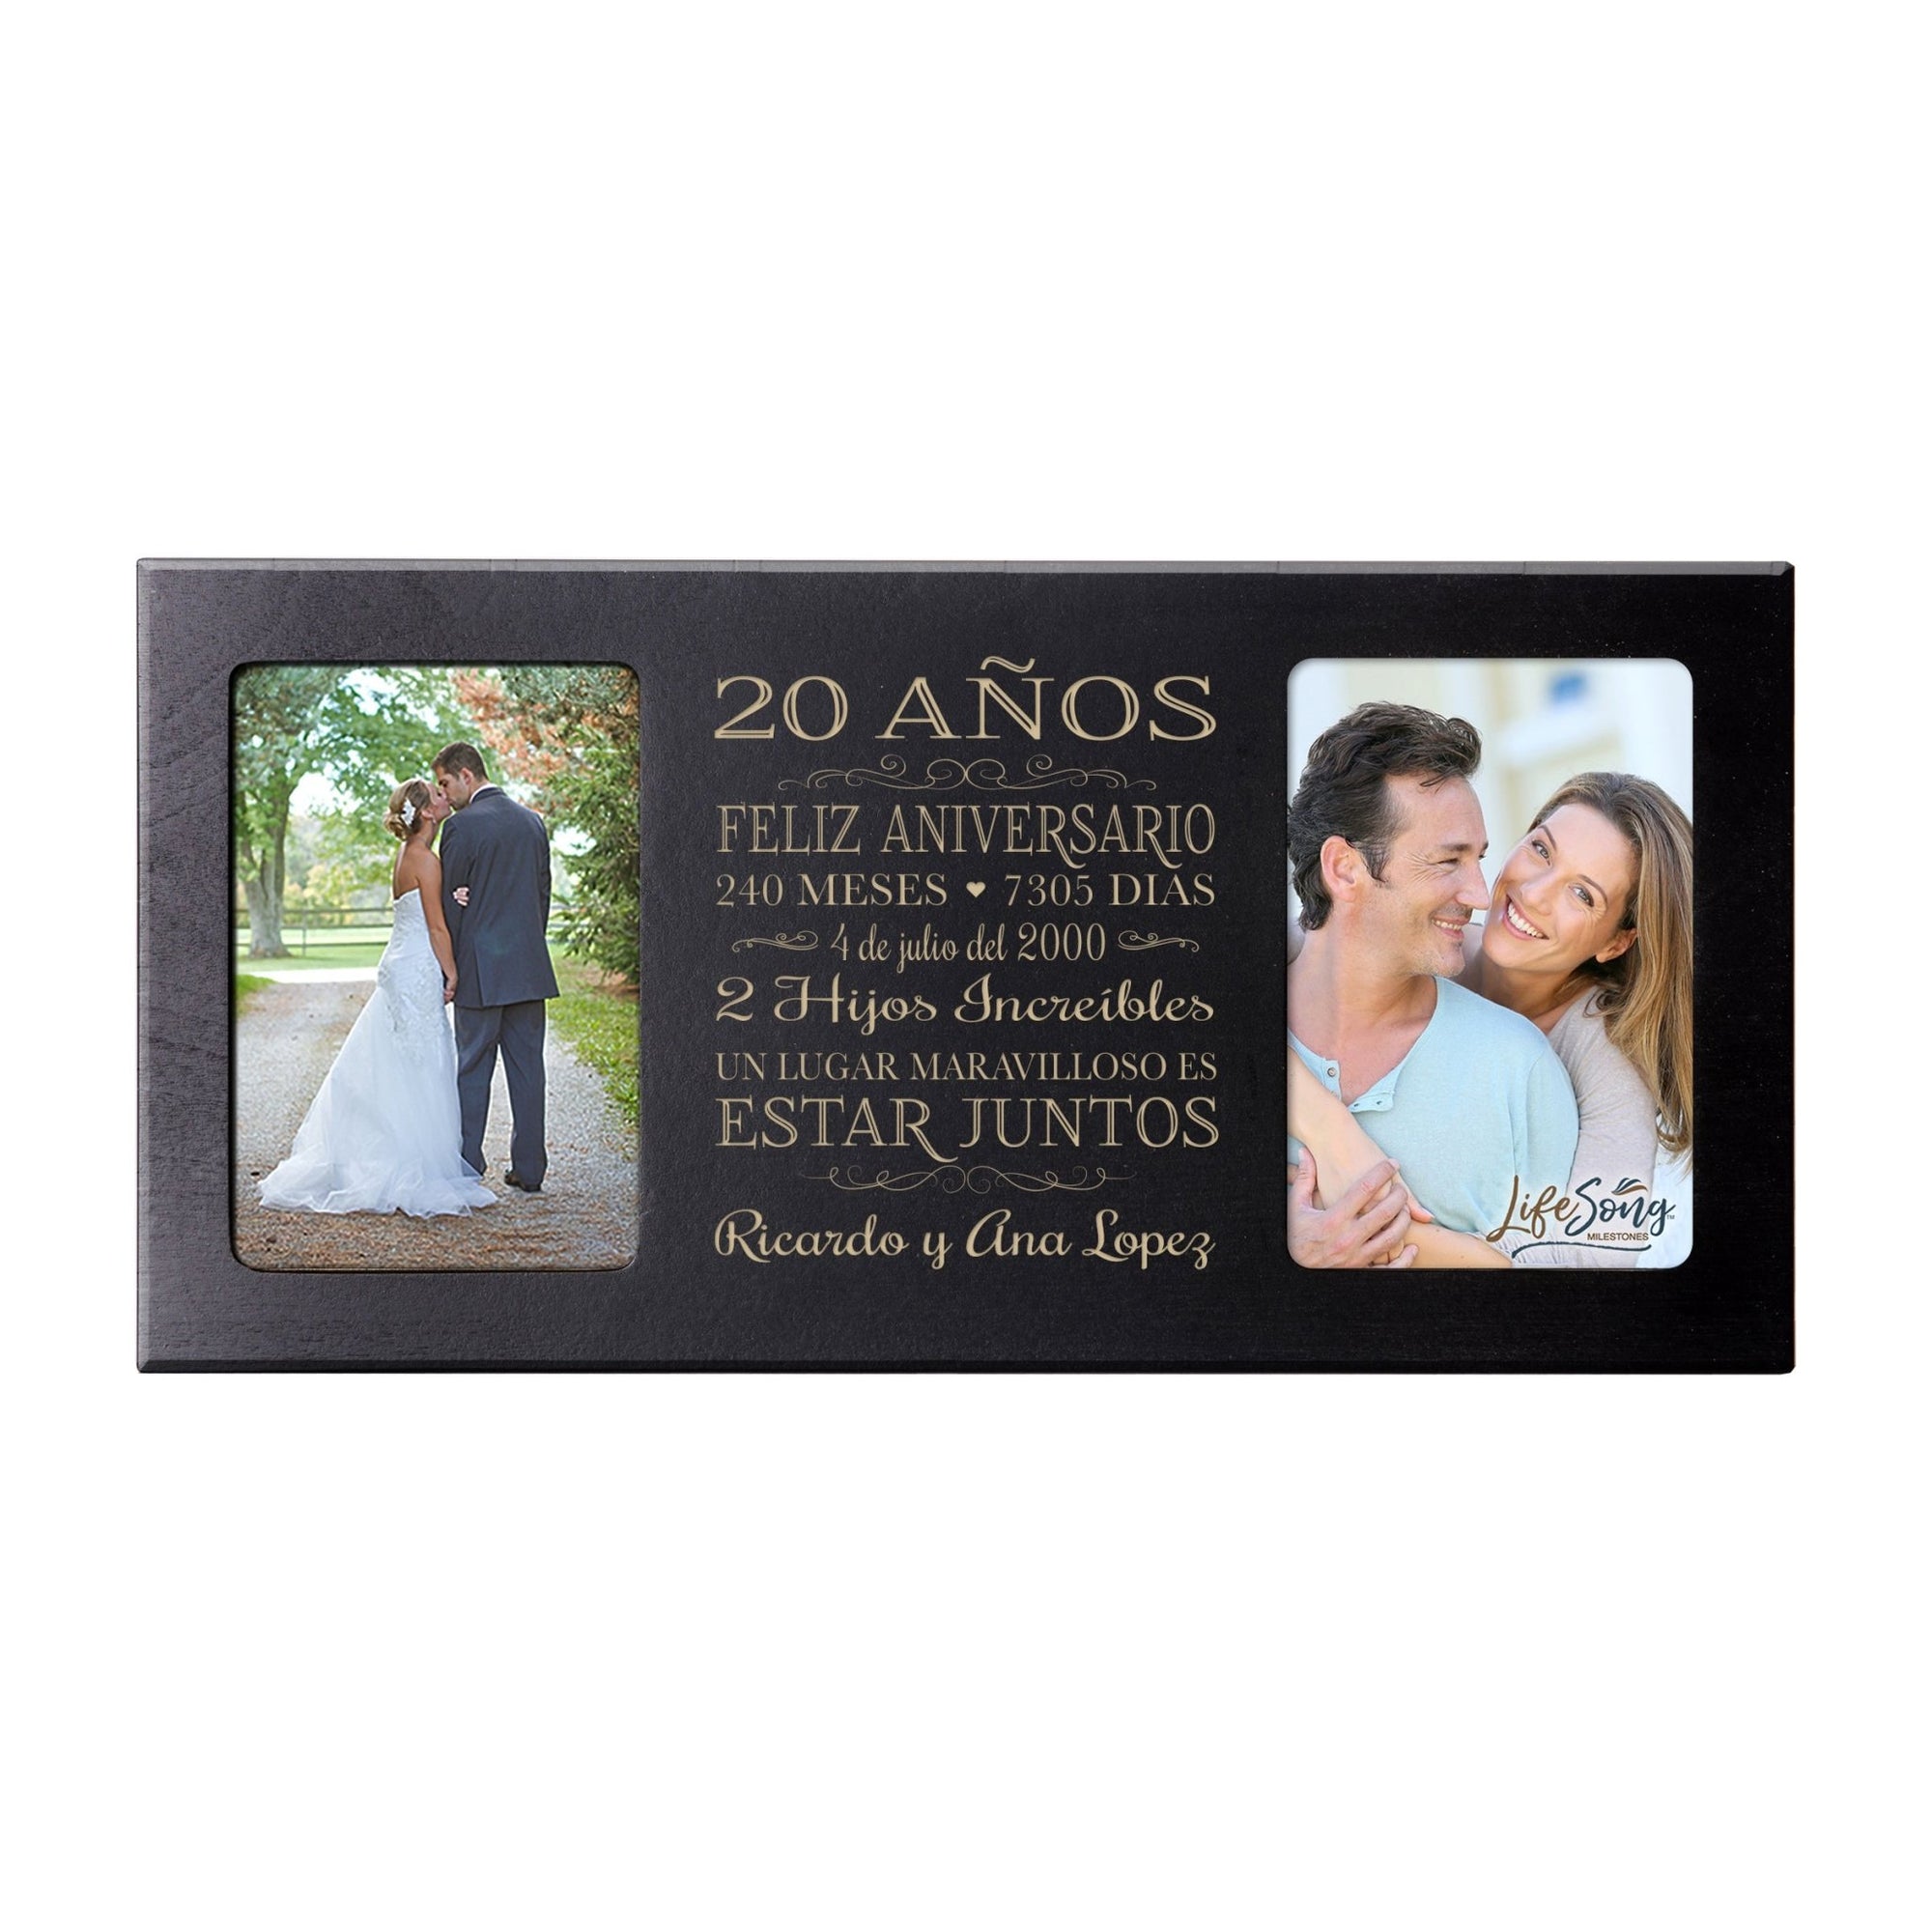 Personalized 20th Anniversary Picture Frame Holds 2-4x6 Photos (Spanish Verse) - LifeSong Milestones